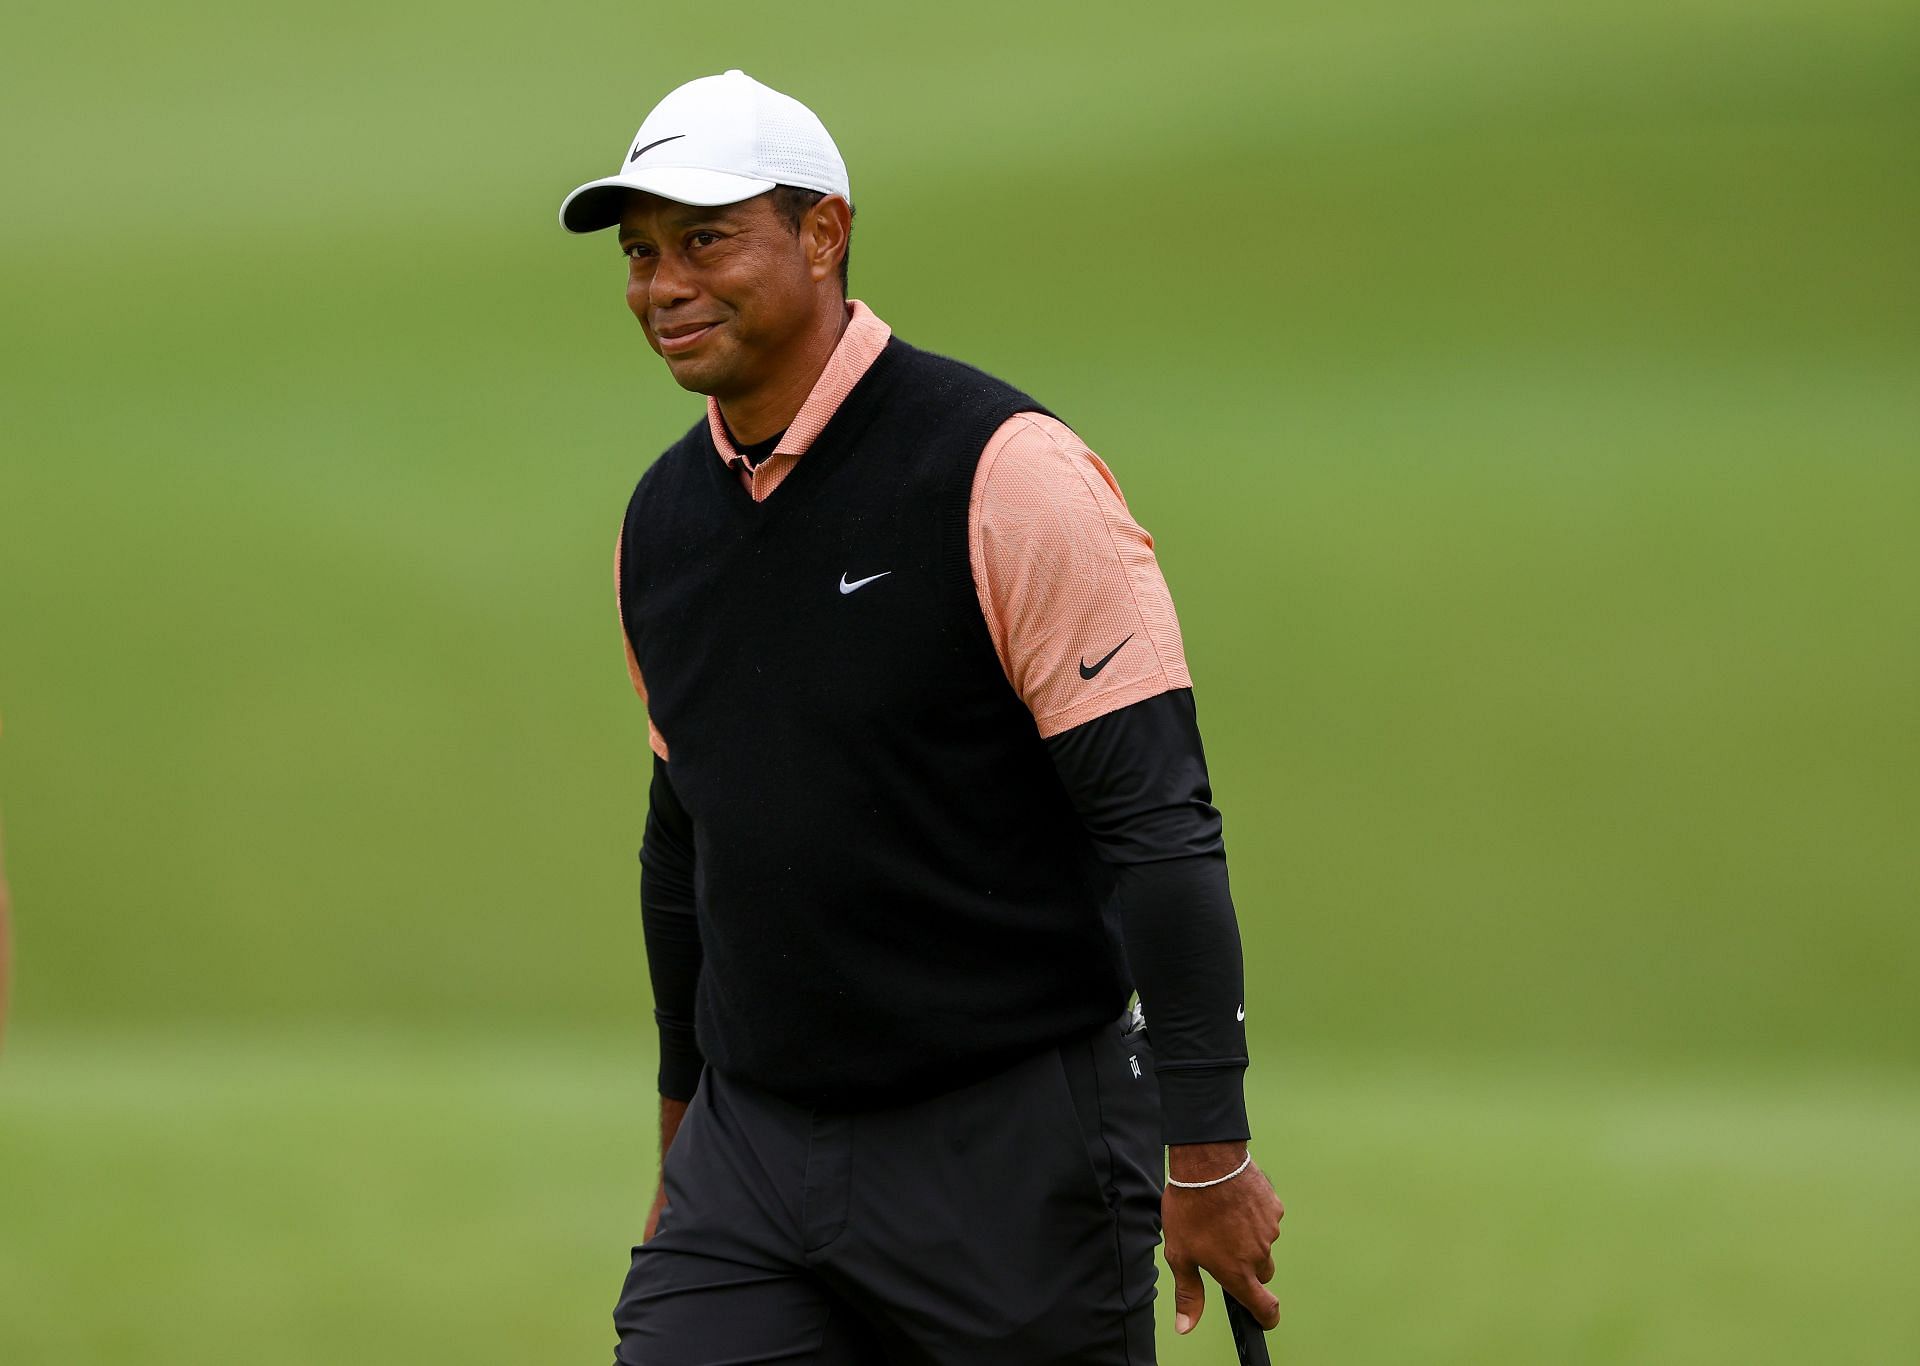 Tiger Woods walks along the course during the third round of the 2022 PGA Championship